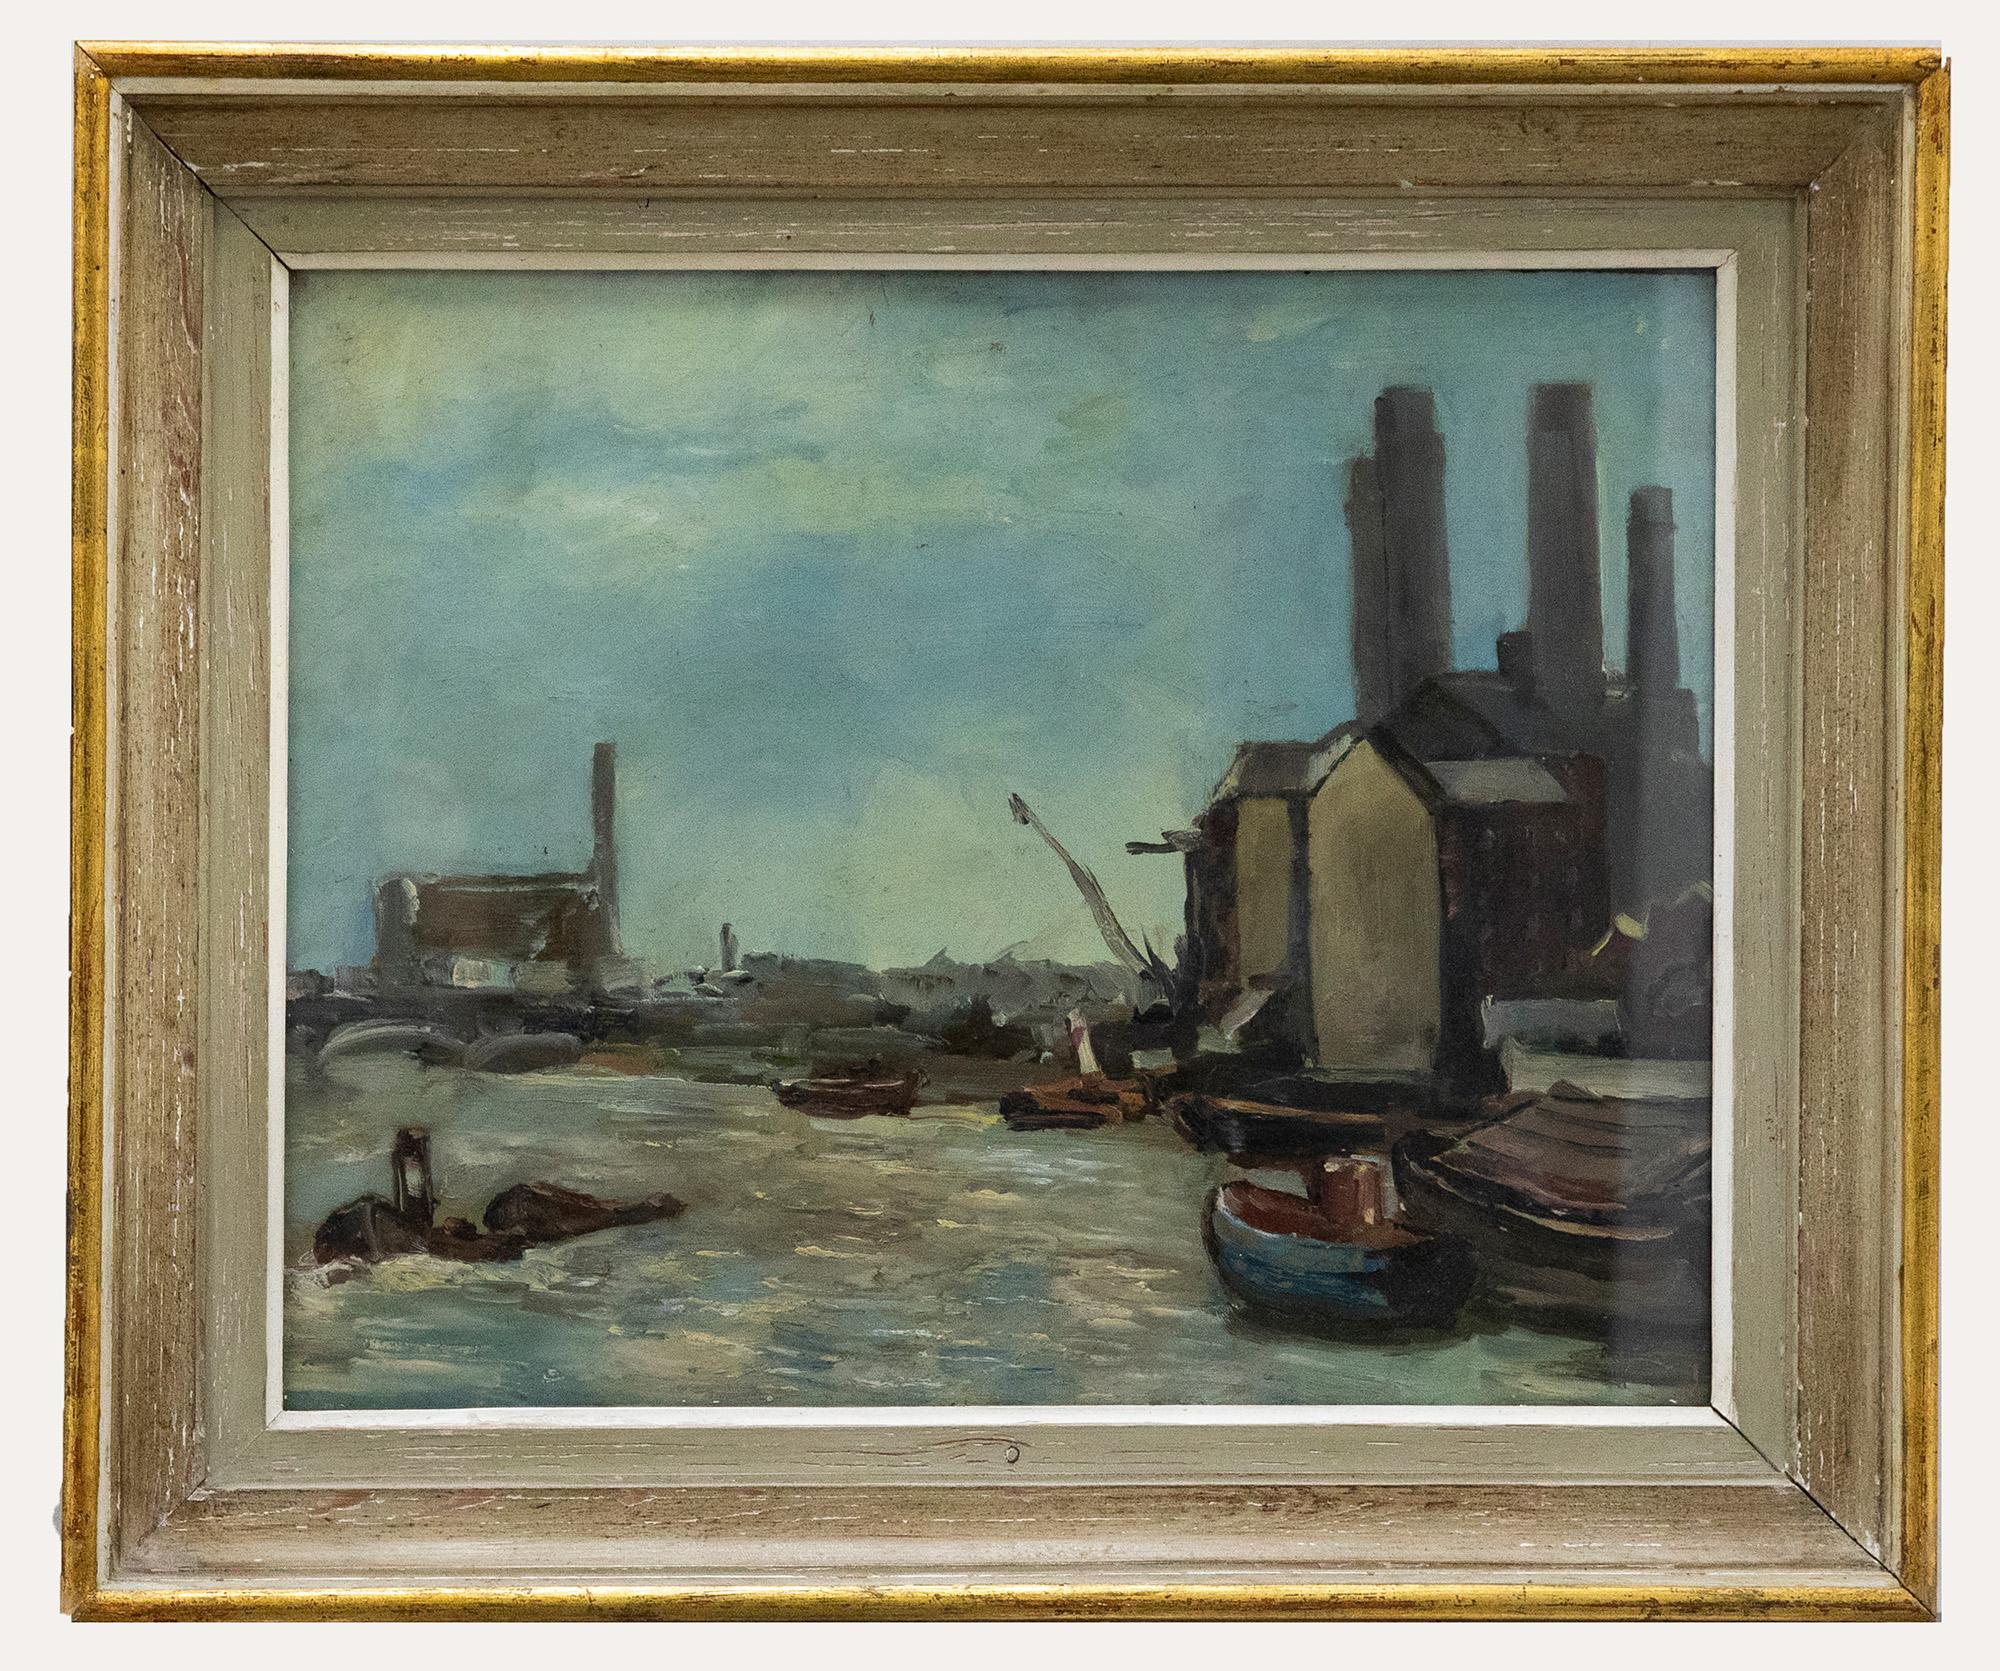 Unknown Figurative Painting - 20th Century Oil - Industrial River Scene